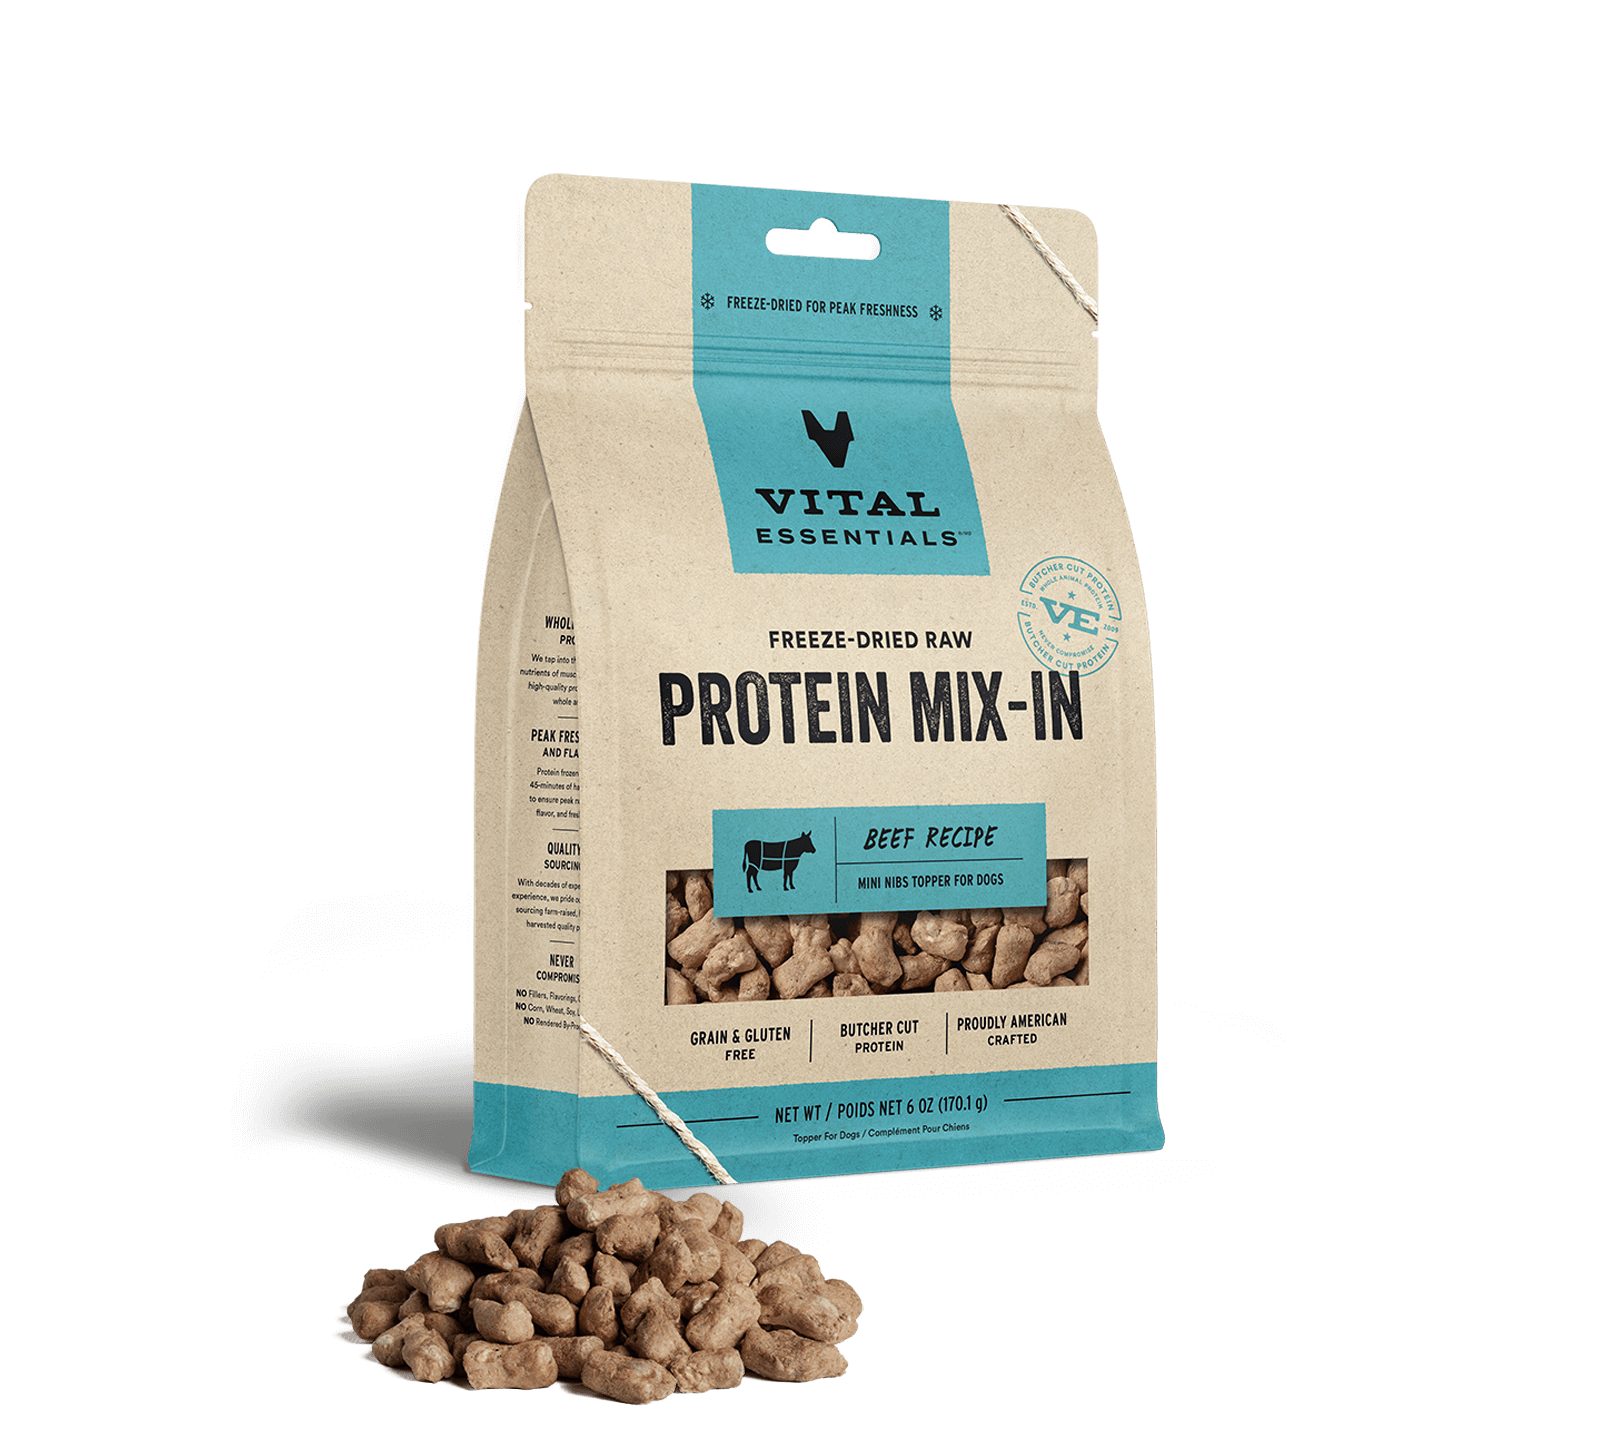 Vital Essentials Freeze-Dried Raw Protein Mix-In Beef Recipe Mini Nibs Topper for Dogs, 6 oz - Items on Sale Now